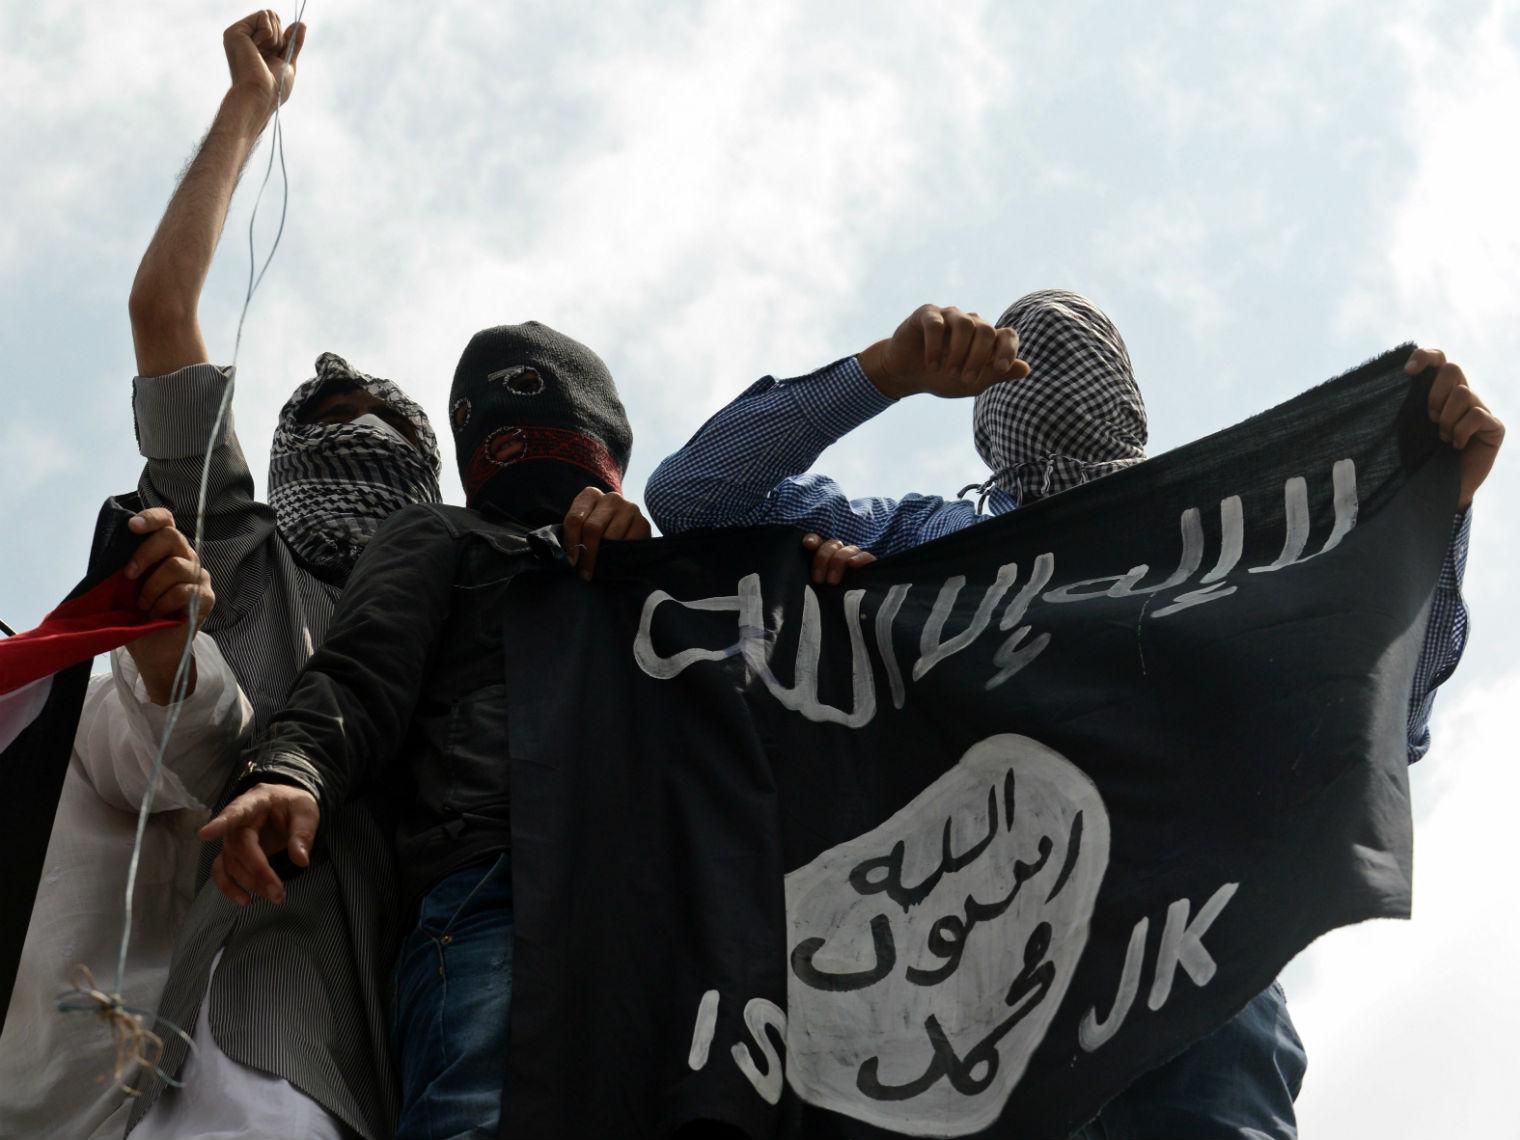 The flag of the terror group Isis is held up at a demonstration in Kashmir